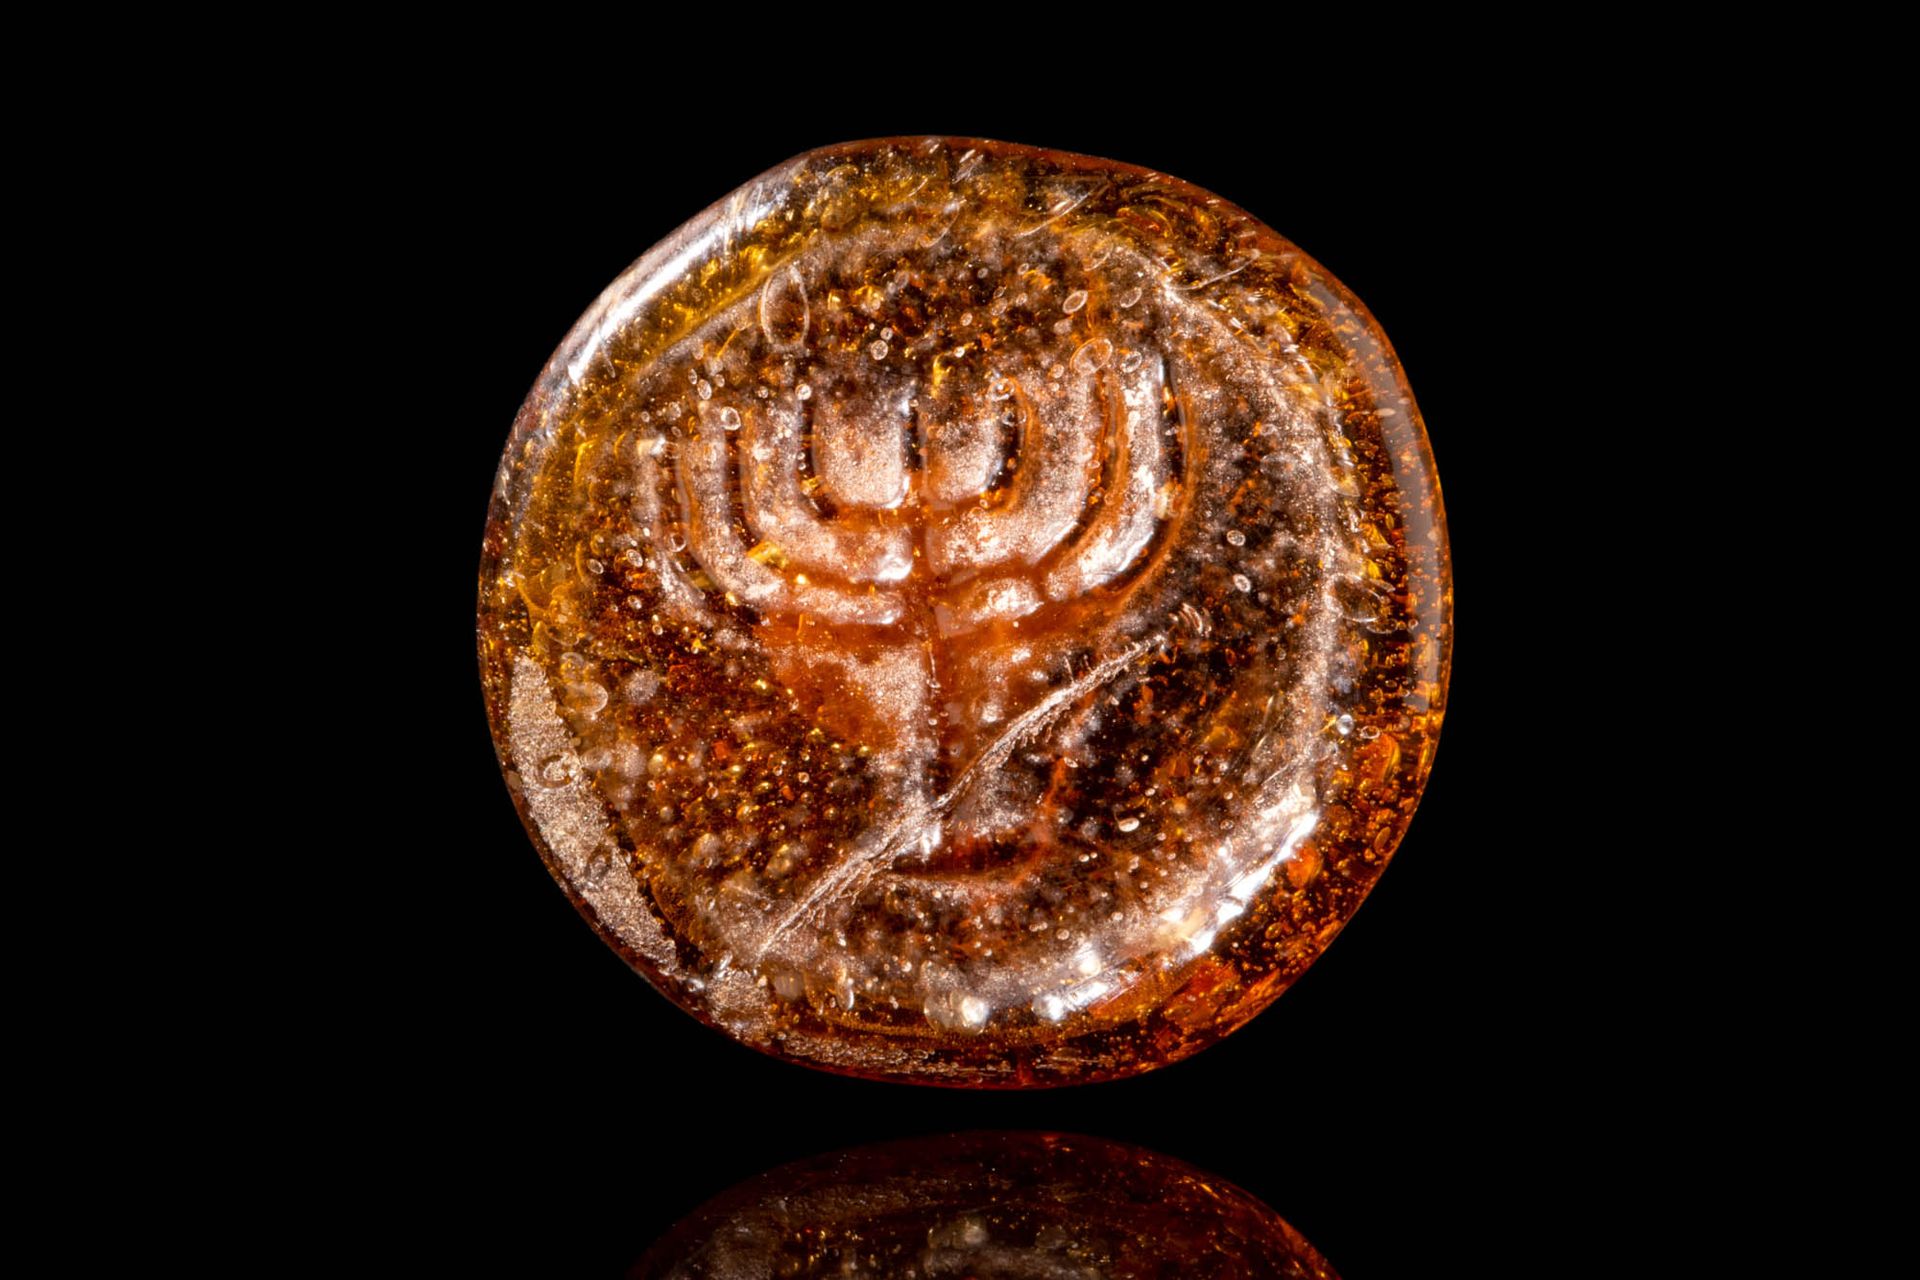 LATE ROMAN GLASS MENORAH STAMP Ca. AD 300 - 500.
A brown glass stamp from the La&hellip;